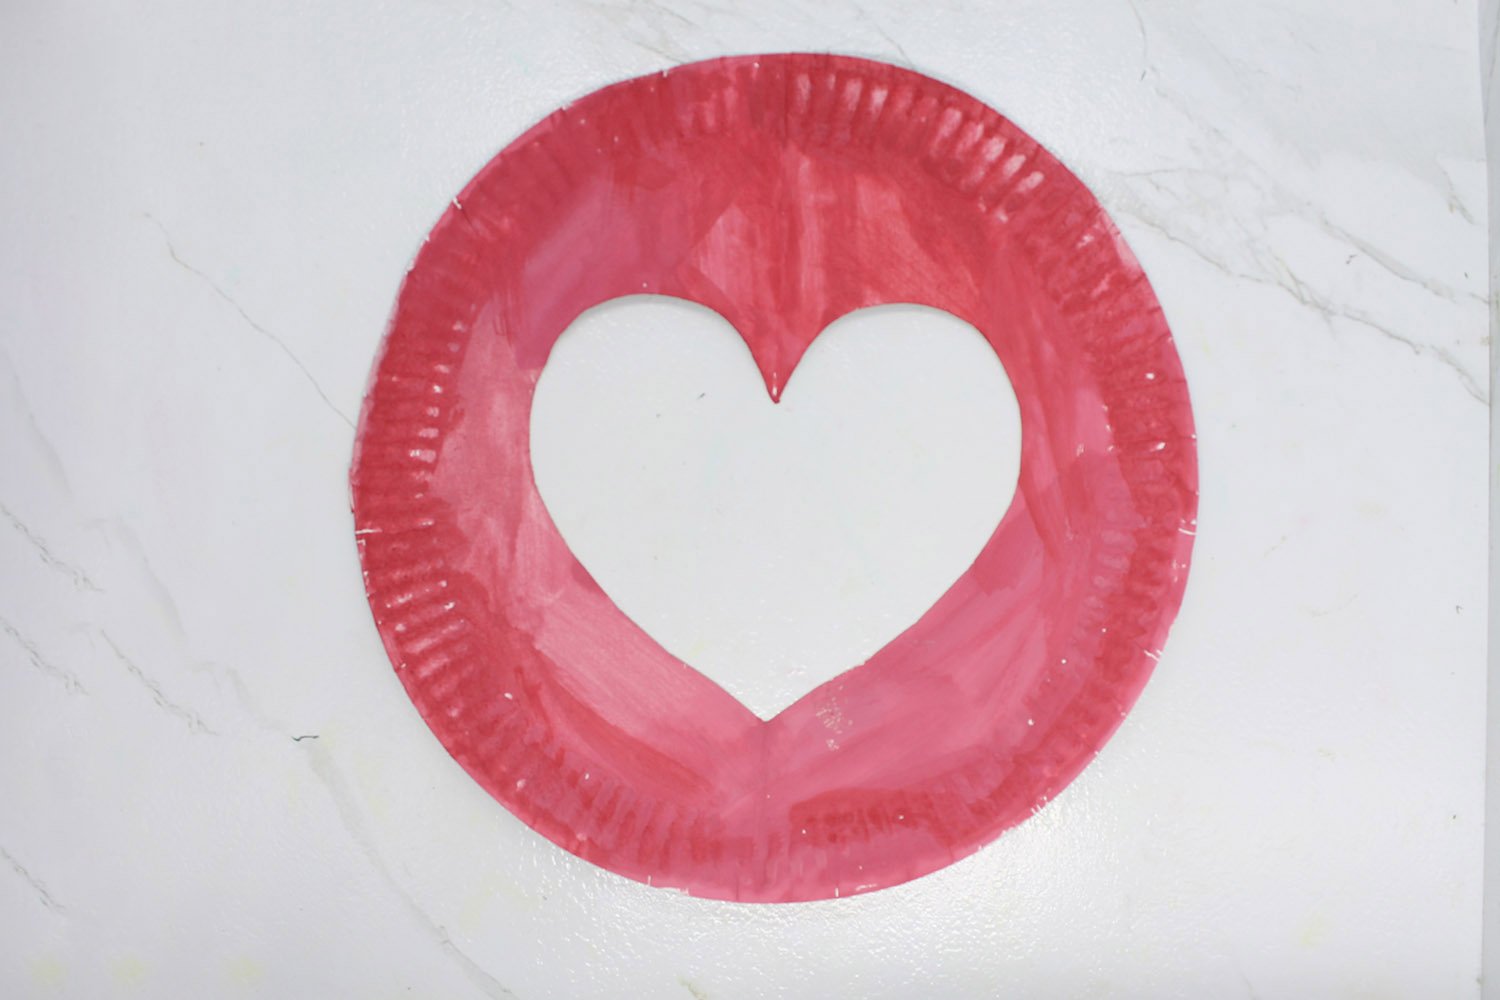 How To Make a Paper Plate Heart - Step 07